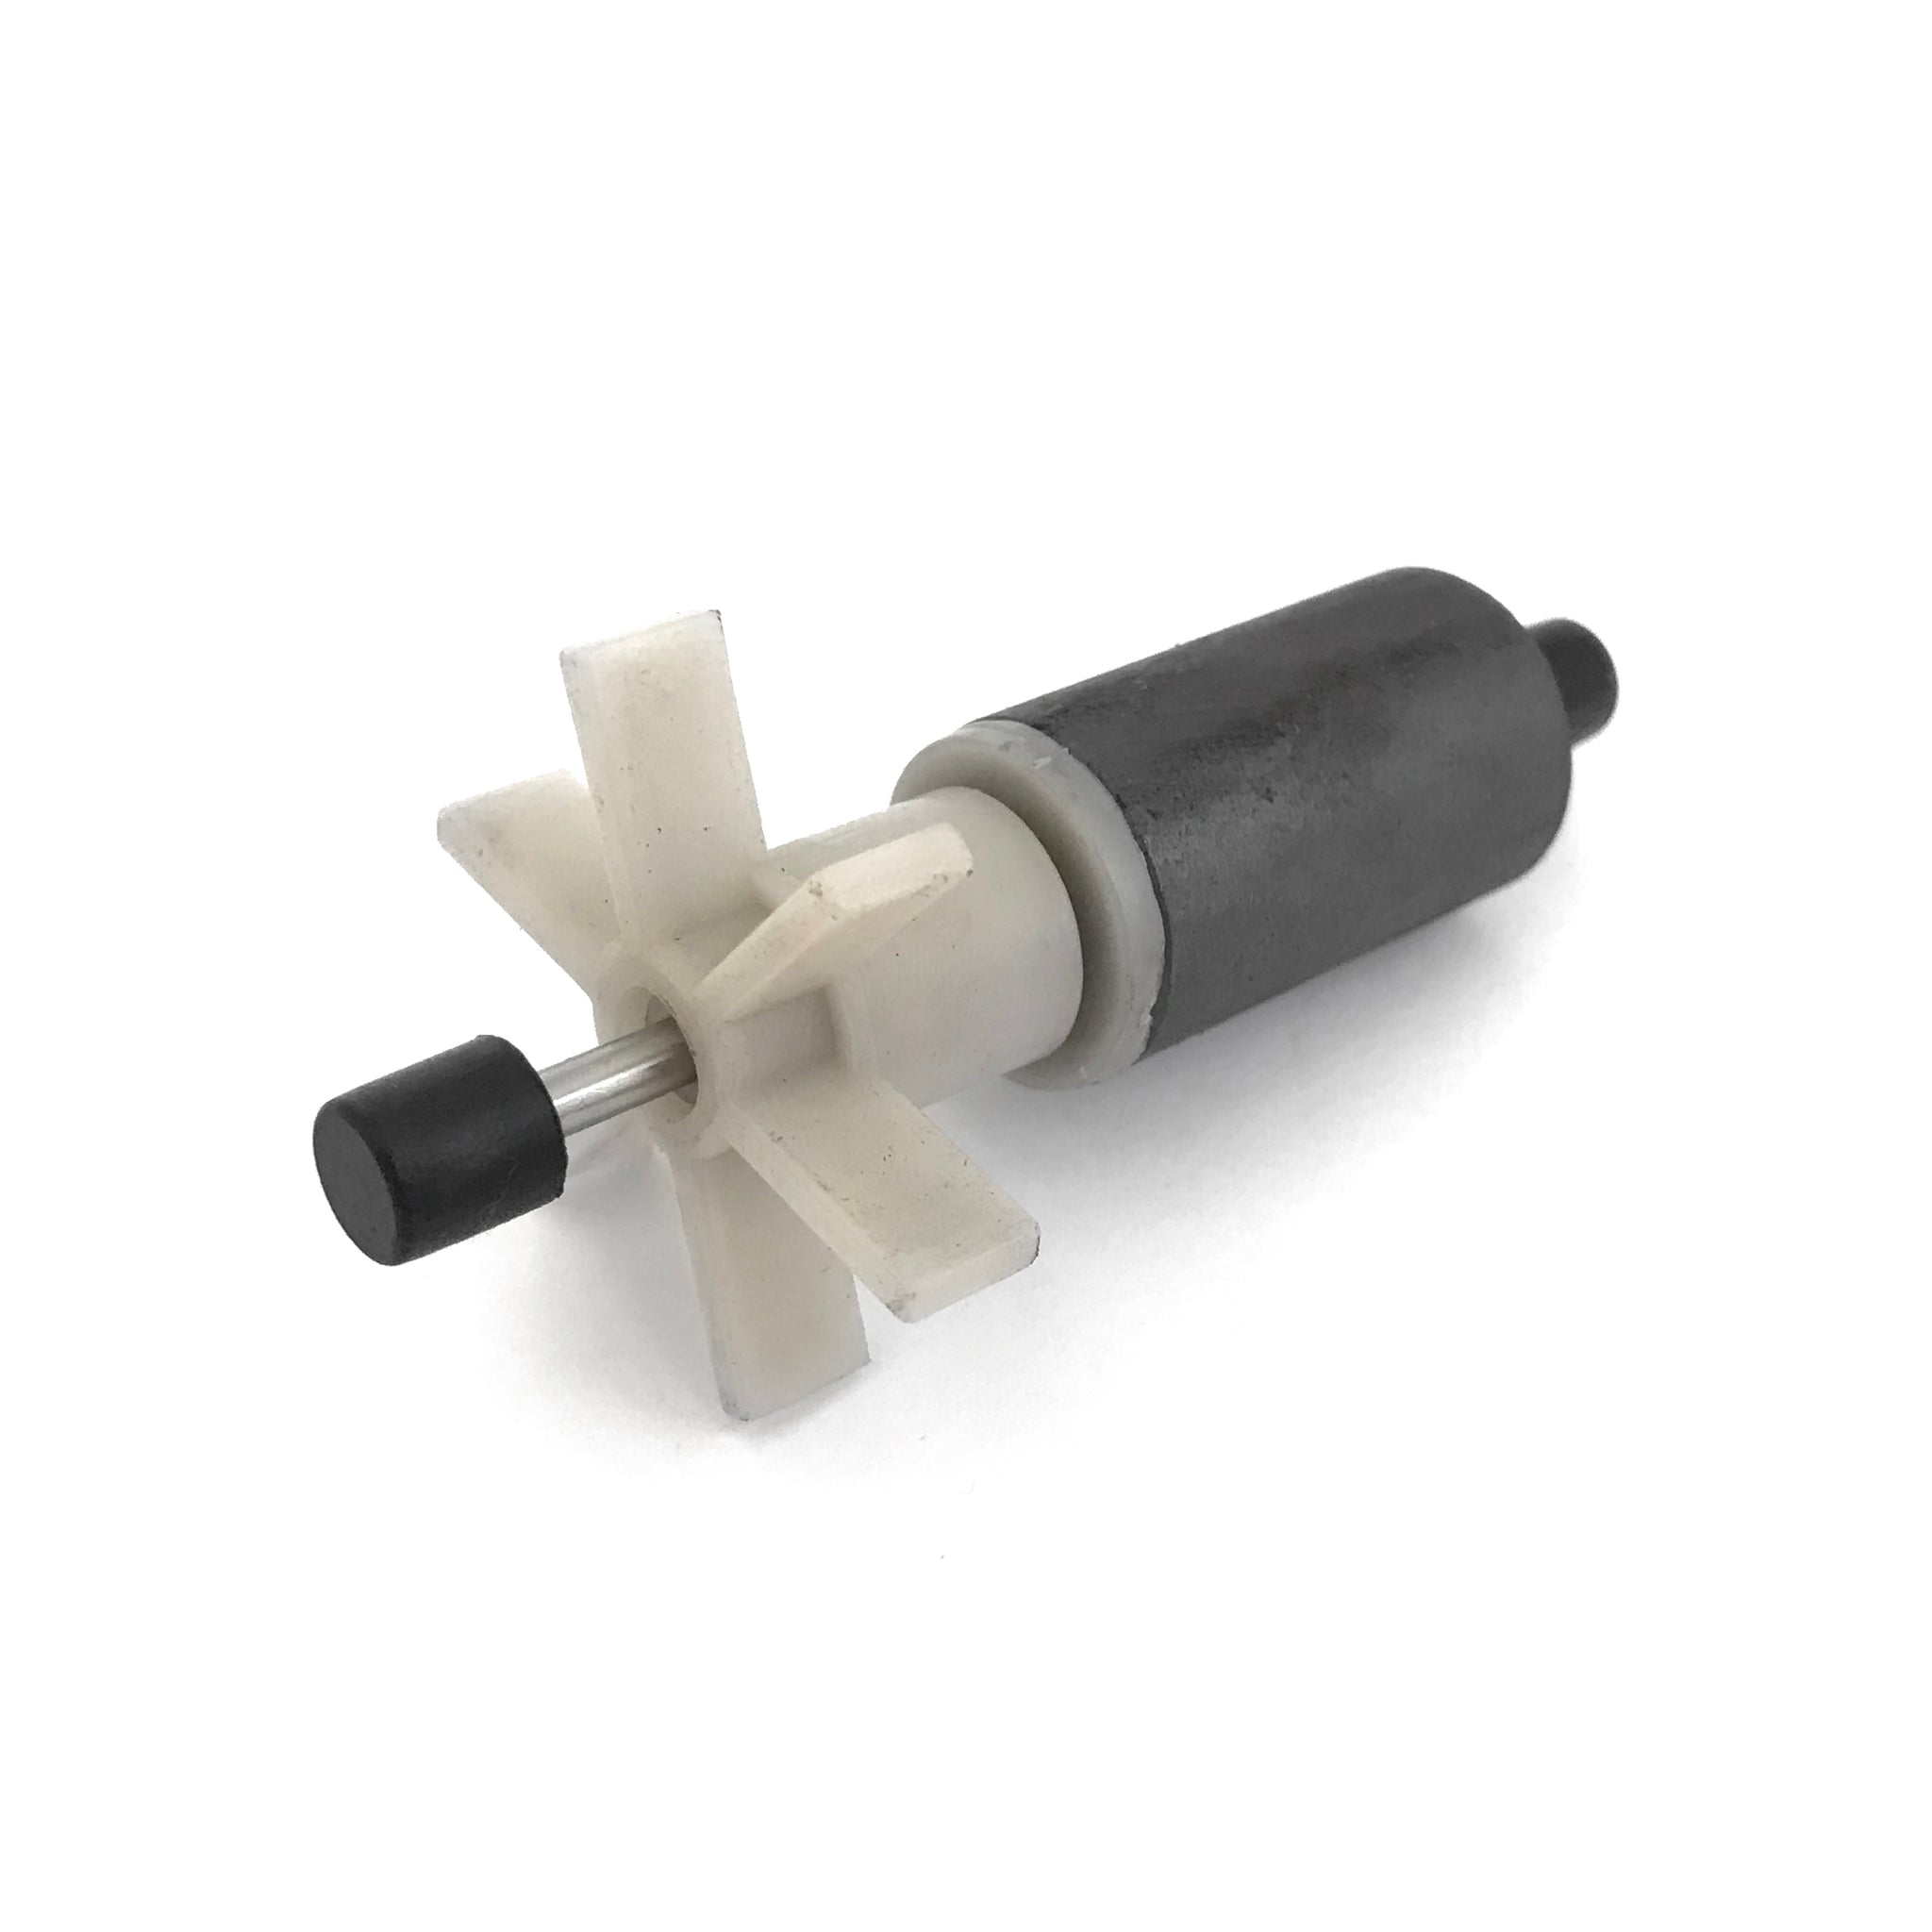 REPLACEMENT IMPELLER FOR SP-400 PUMP